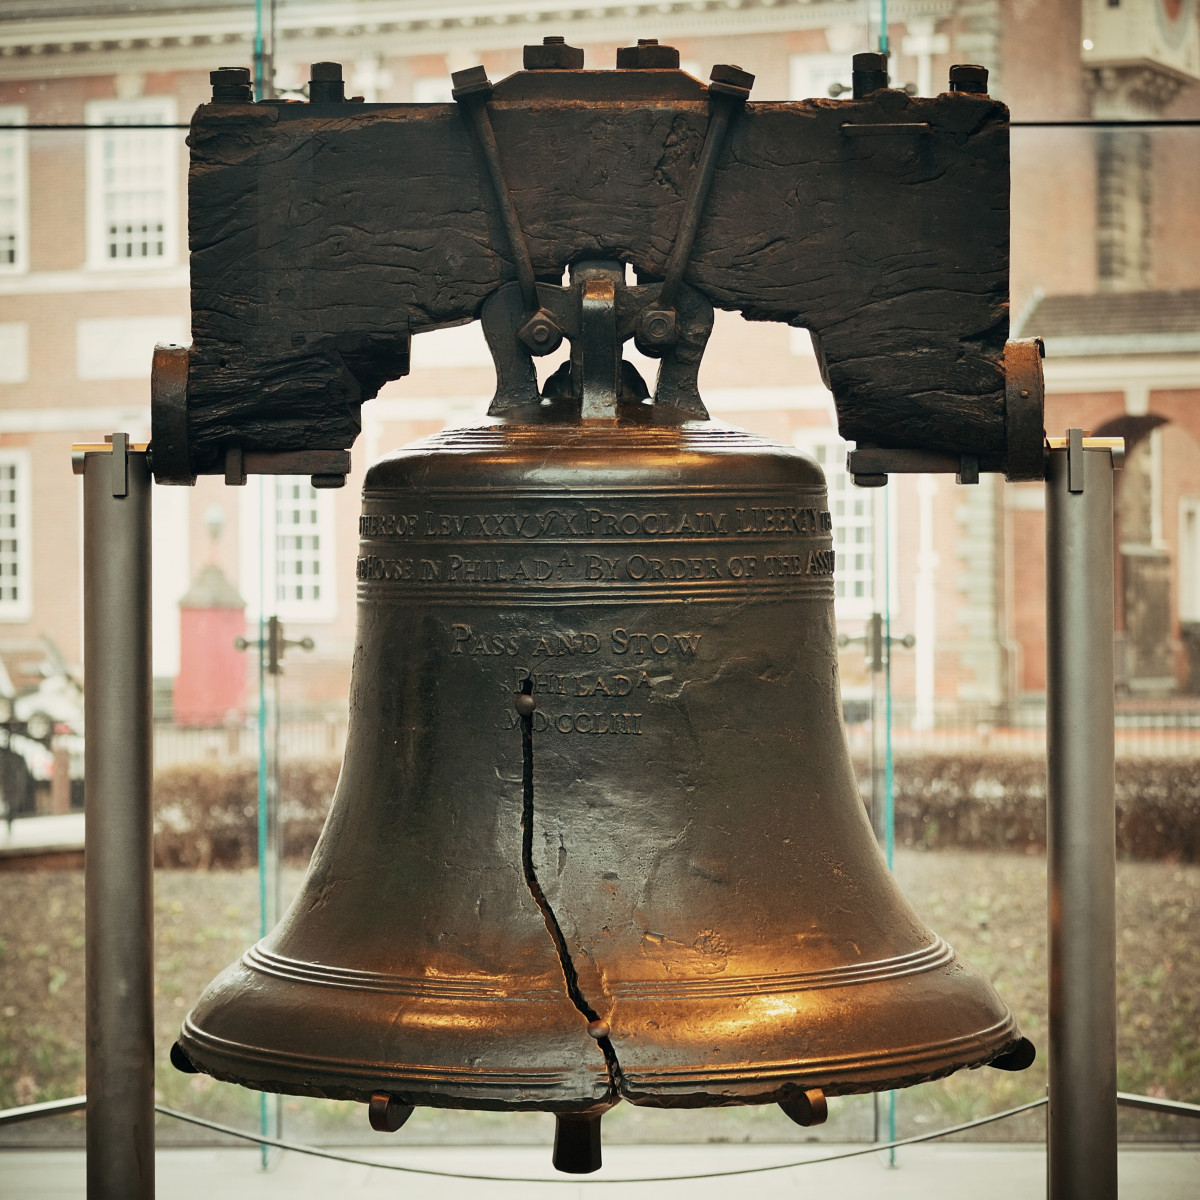 Should the Liberty Bell Leave Philadelphia? :: Right & Free